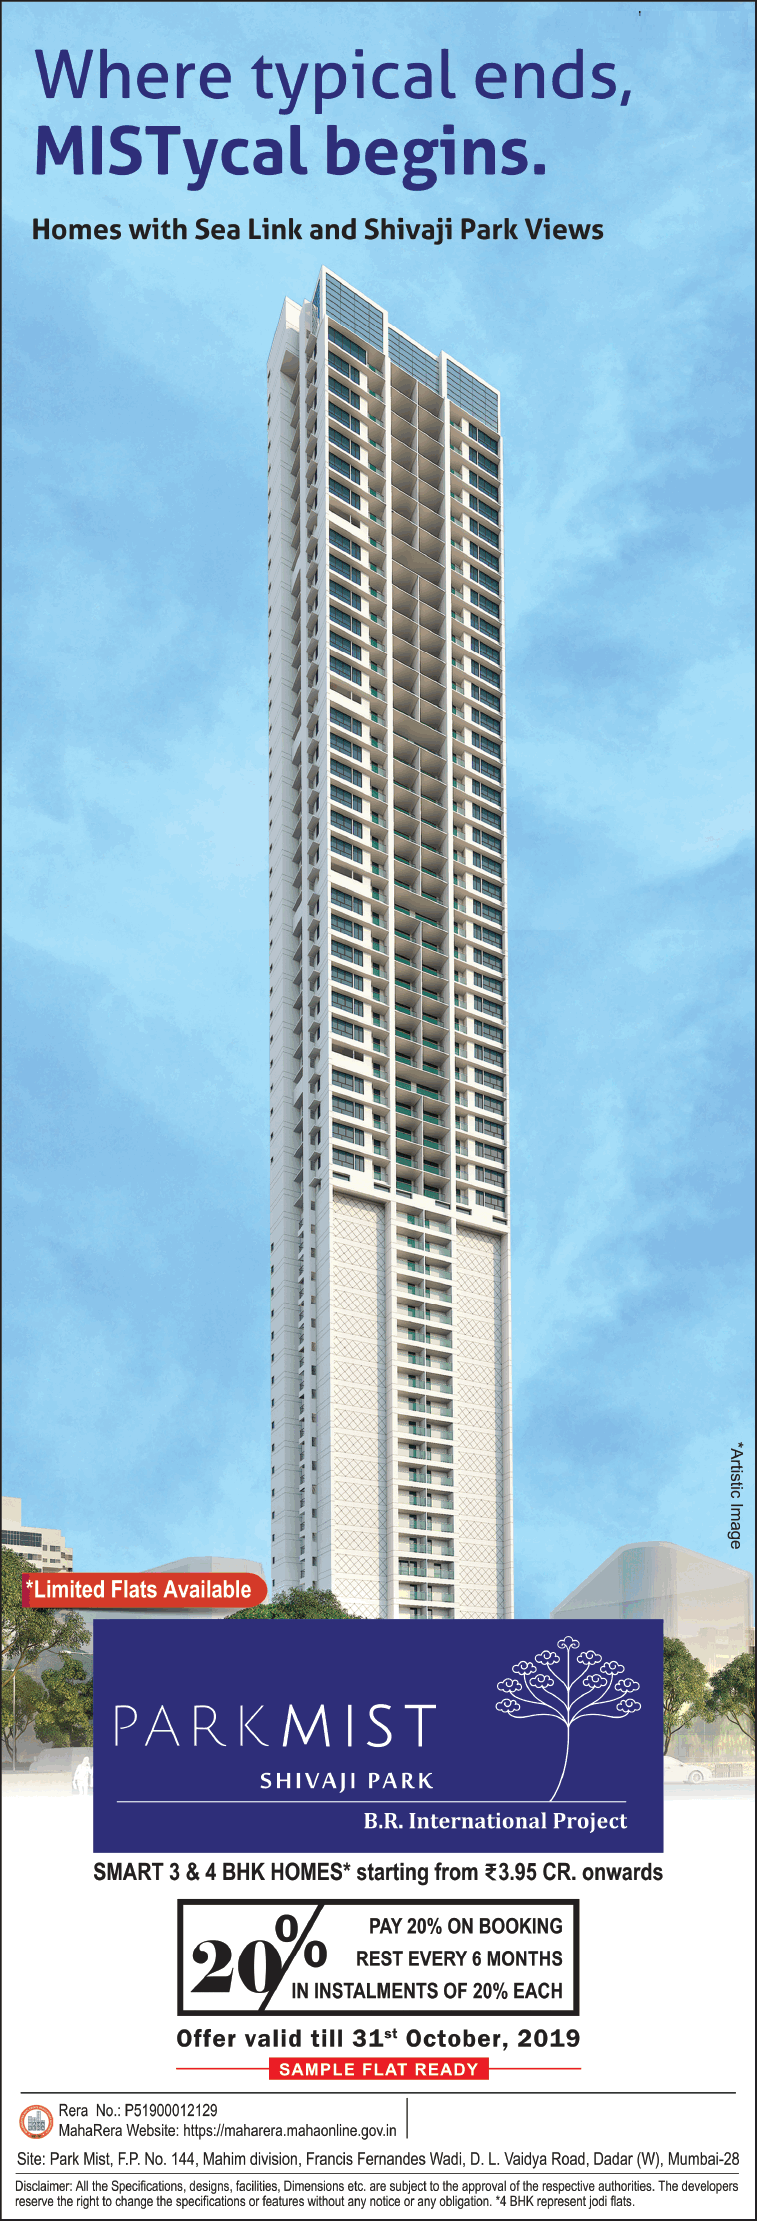 Book 3 & 4 BHK homes Rs 3.95 Cr at Park Mist in Mumbai Update